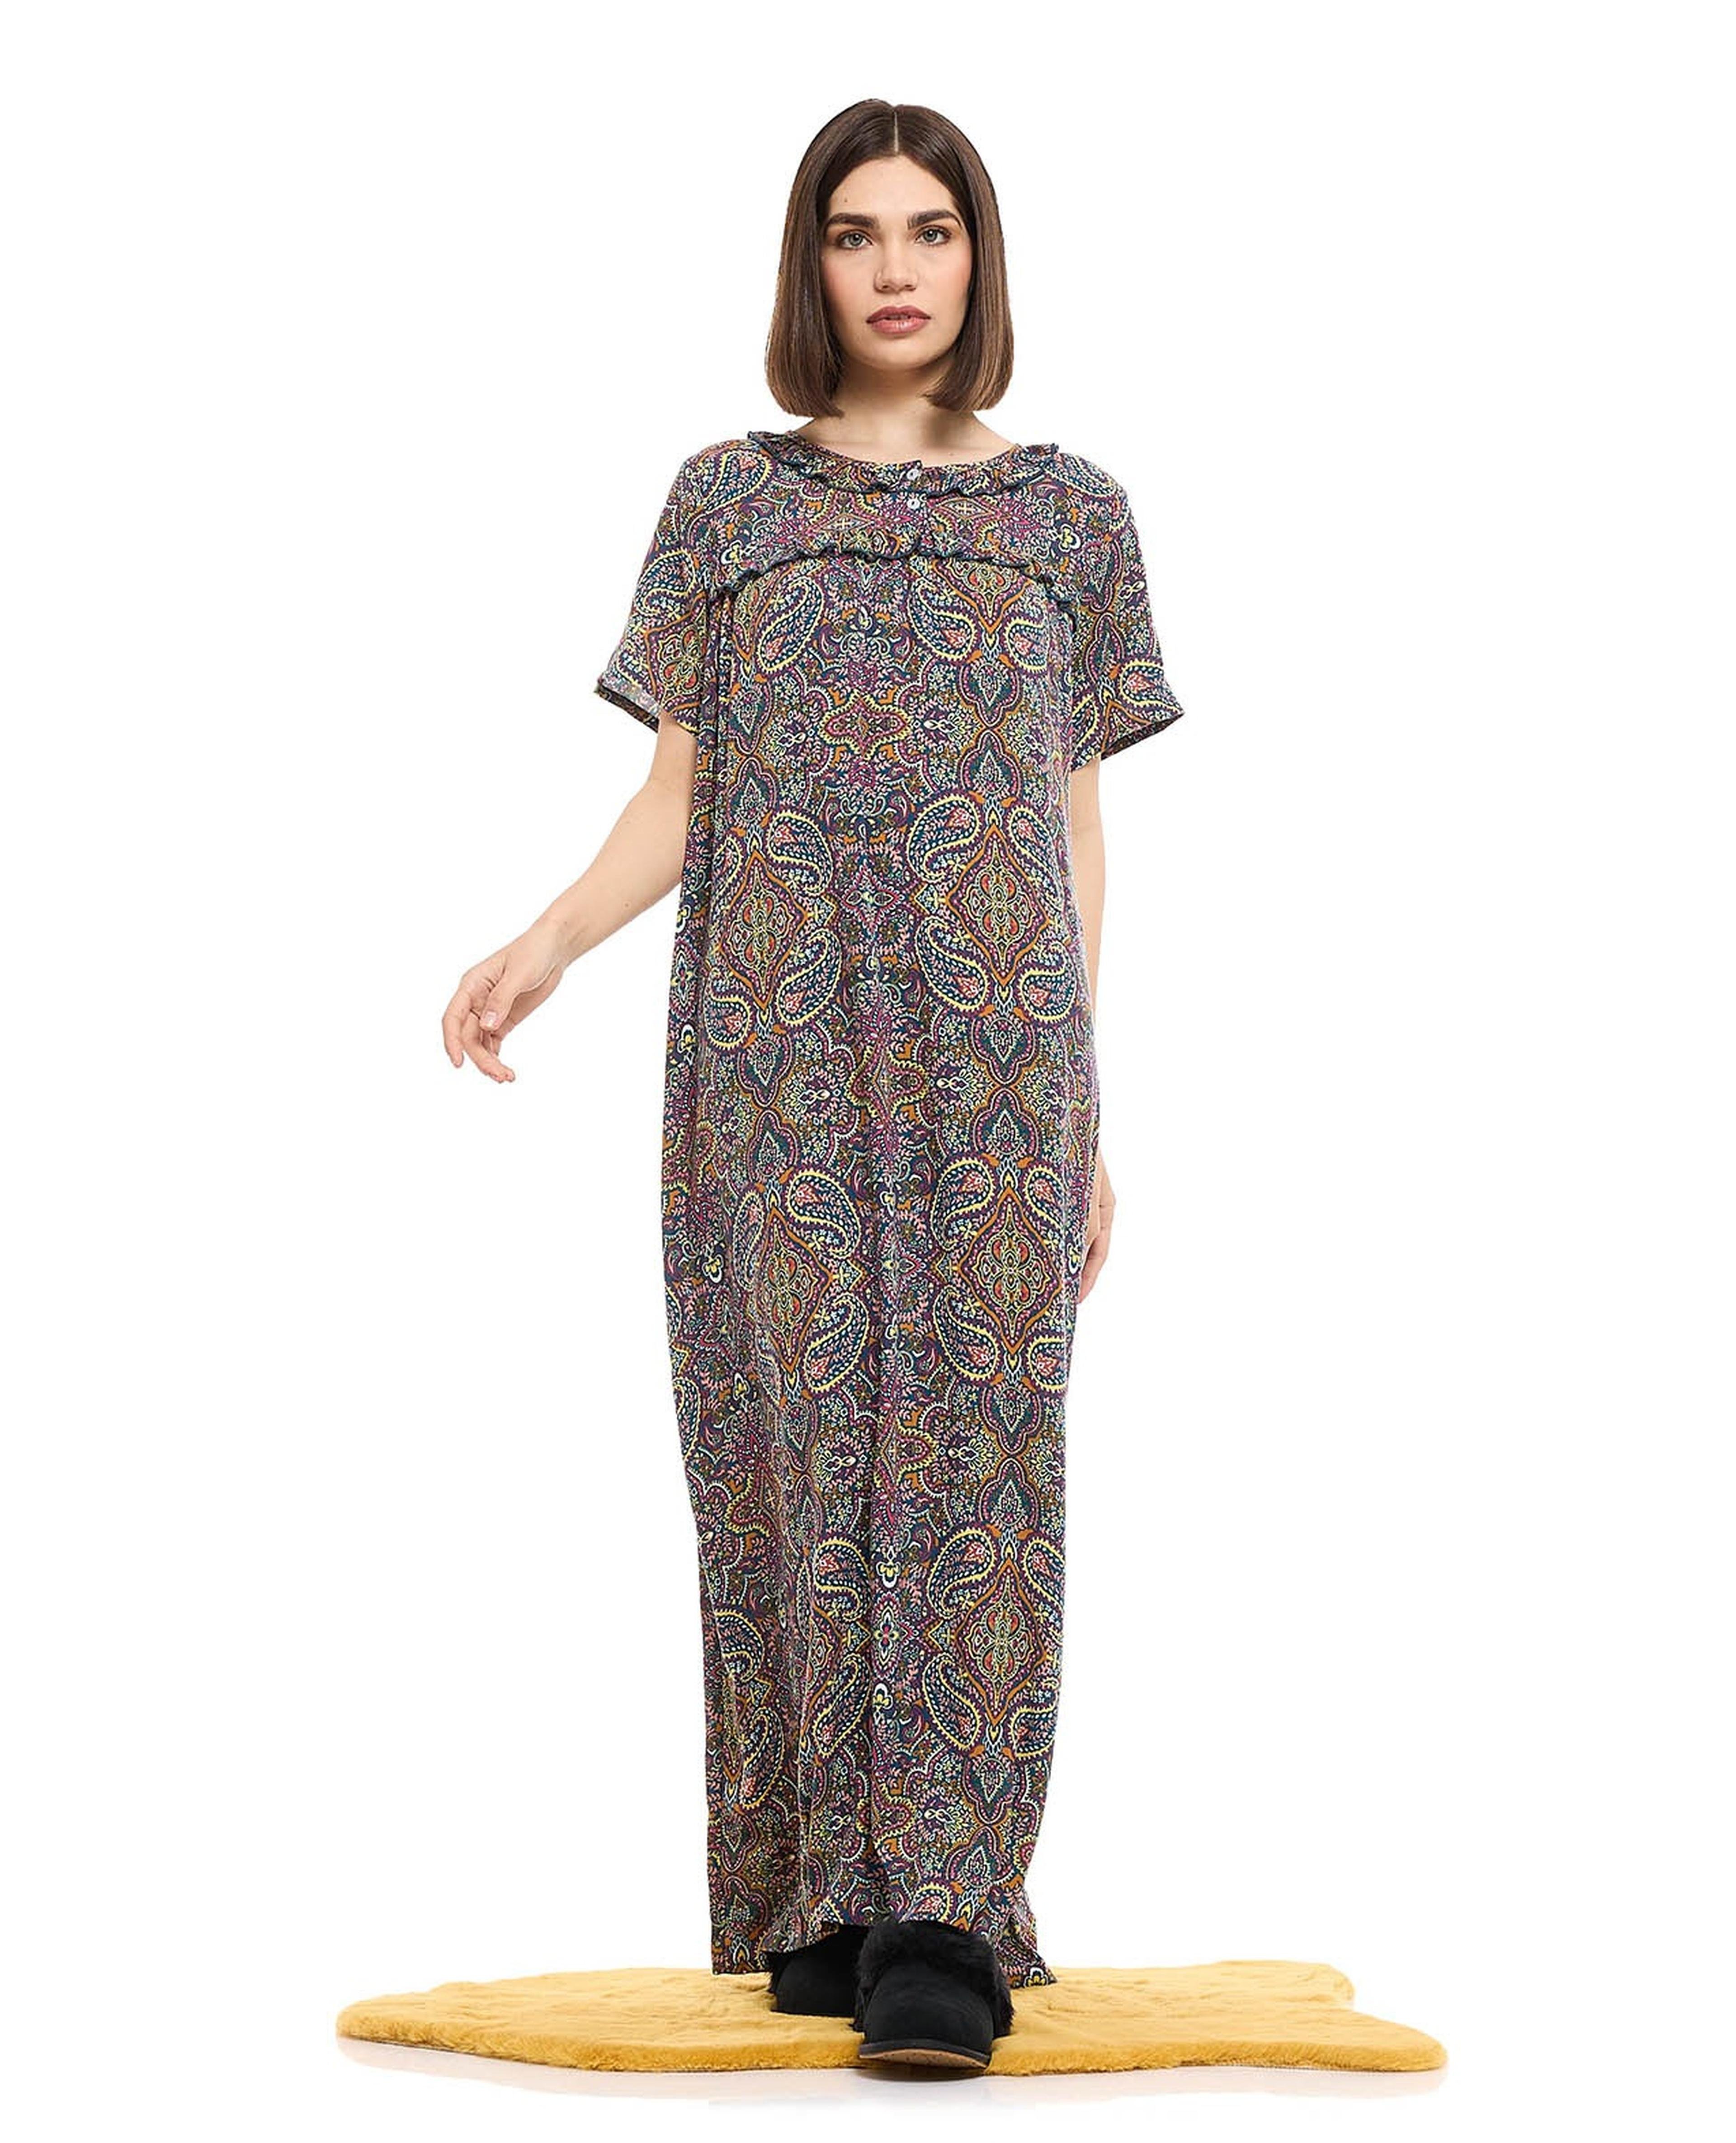 Paisley Patterned Night Gown with Short Sleeves